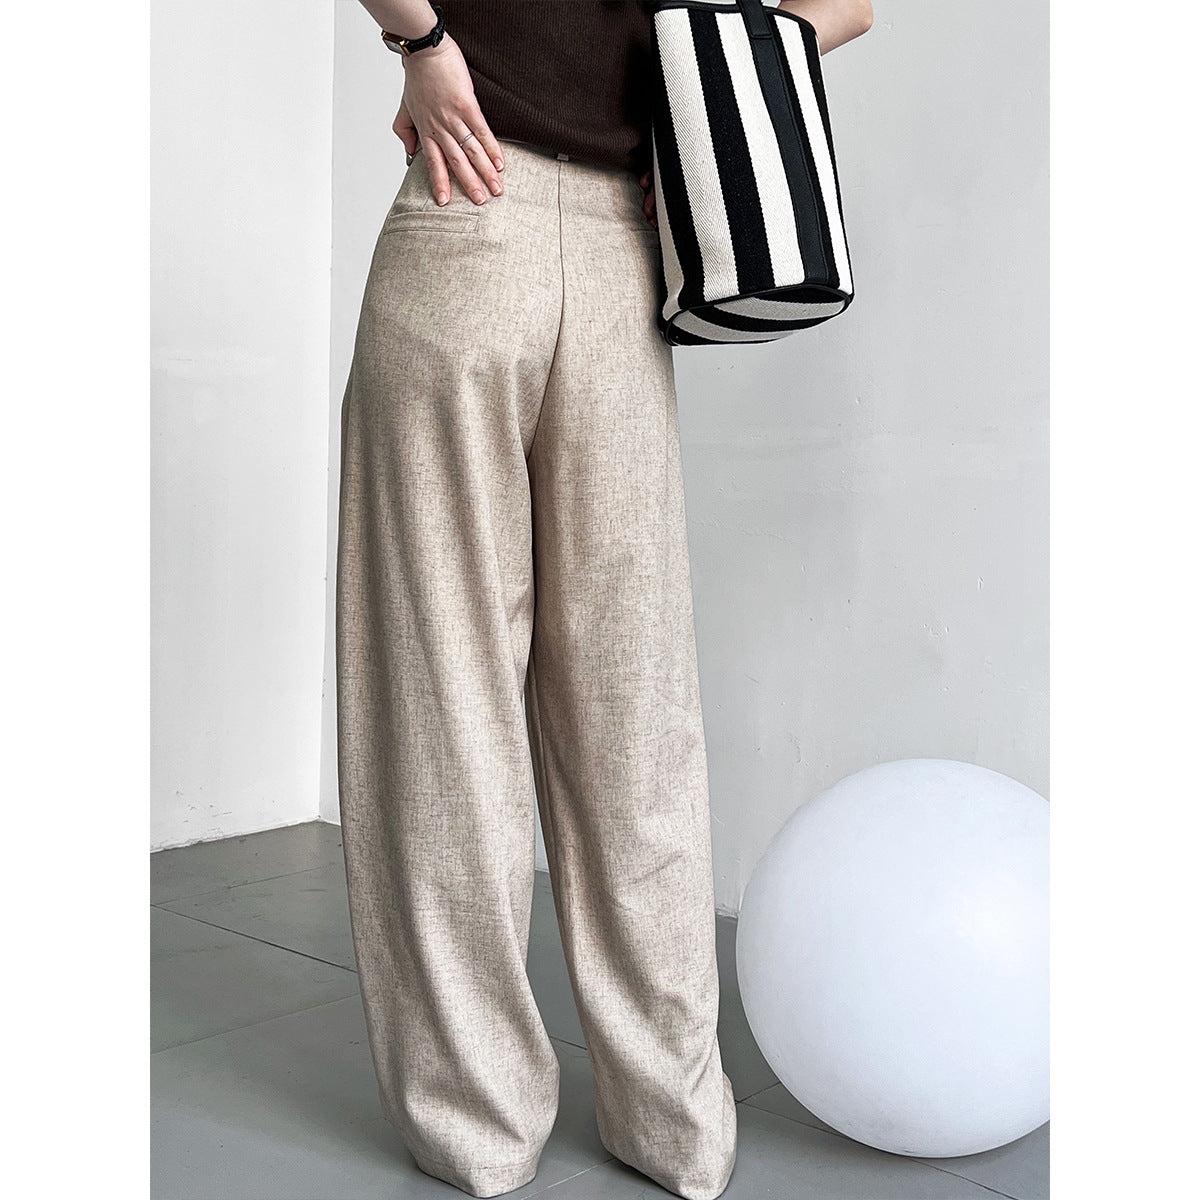 Minimalist Old Money Mopping Work Pant for Women Spring Autumn Office Loose Drooping Wide Leg Pants